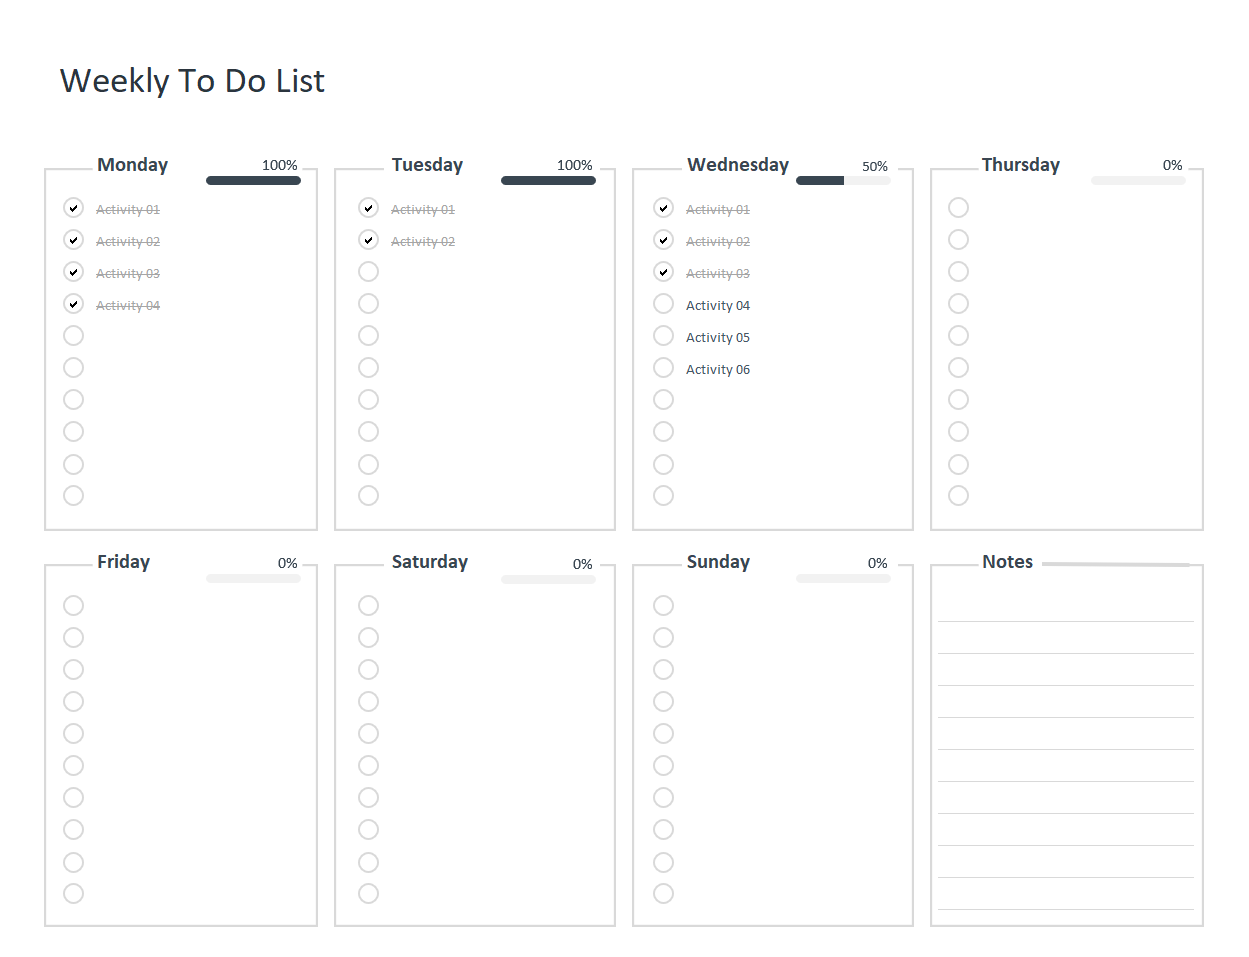 free-weekly-to-do-list-template-excel-adnia-excel-templates